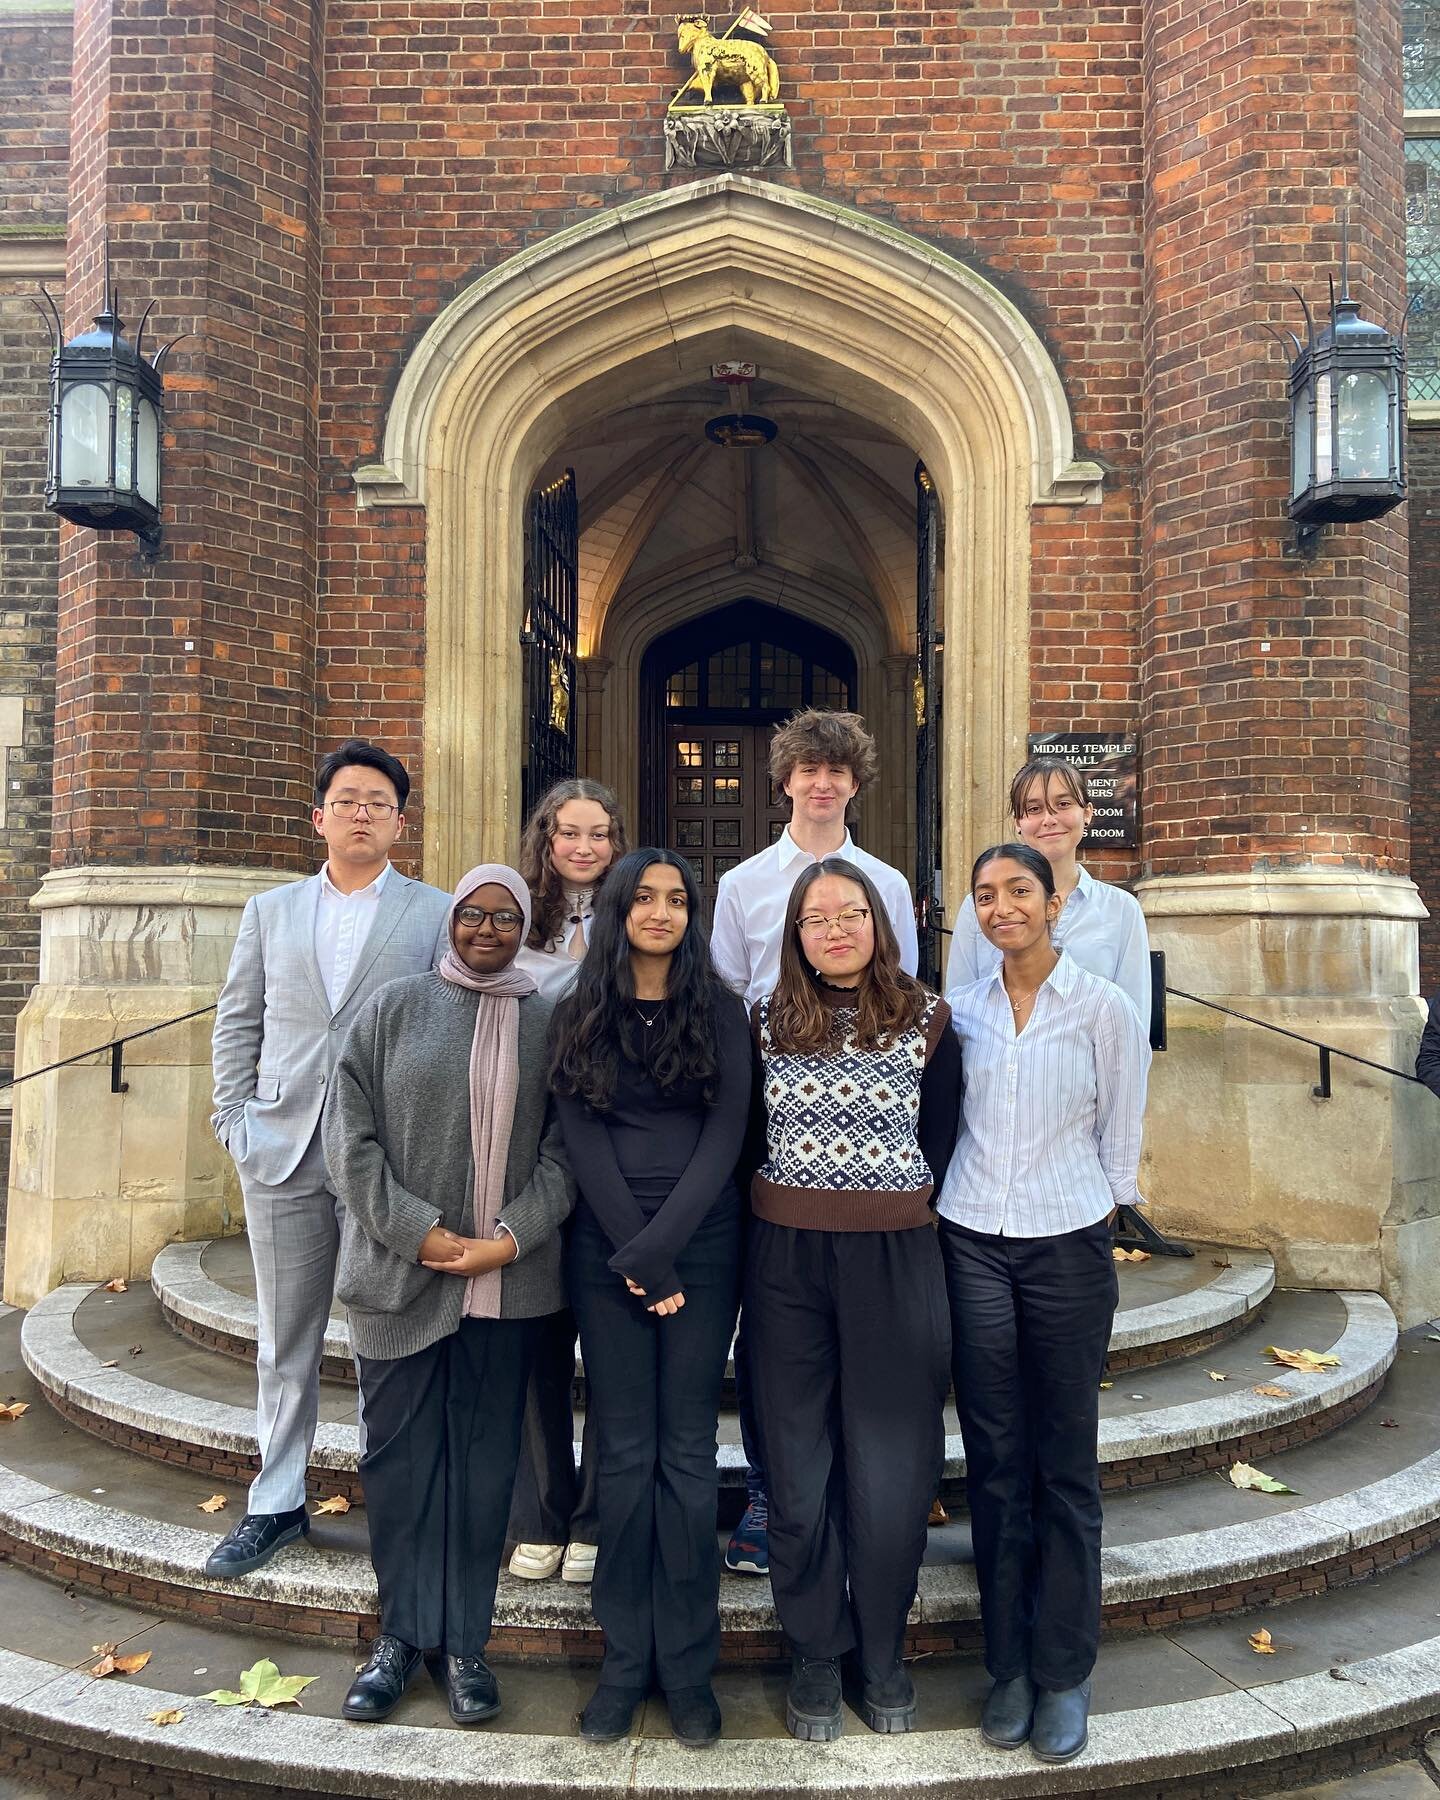 Class of Oct 2023 Law Course!

Happy students after a delicious lunch in hall at the Honourable Society of Middle Temple! 
.
.
.
.
#students #middletemple #honourablesocietyofmiddletemple #postlunch #classphoto #groupphoto